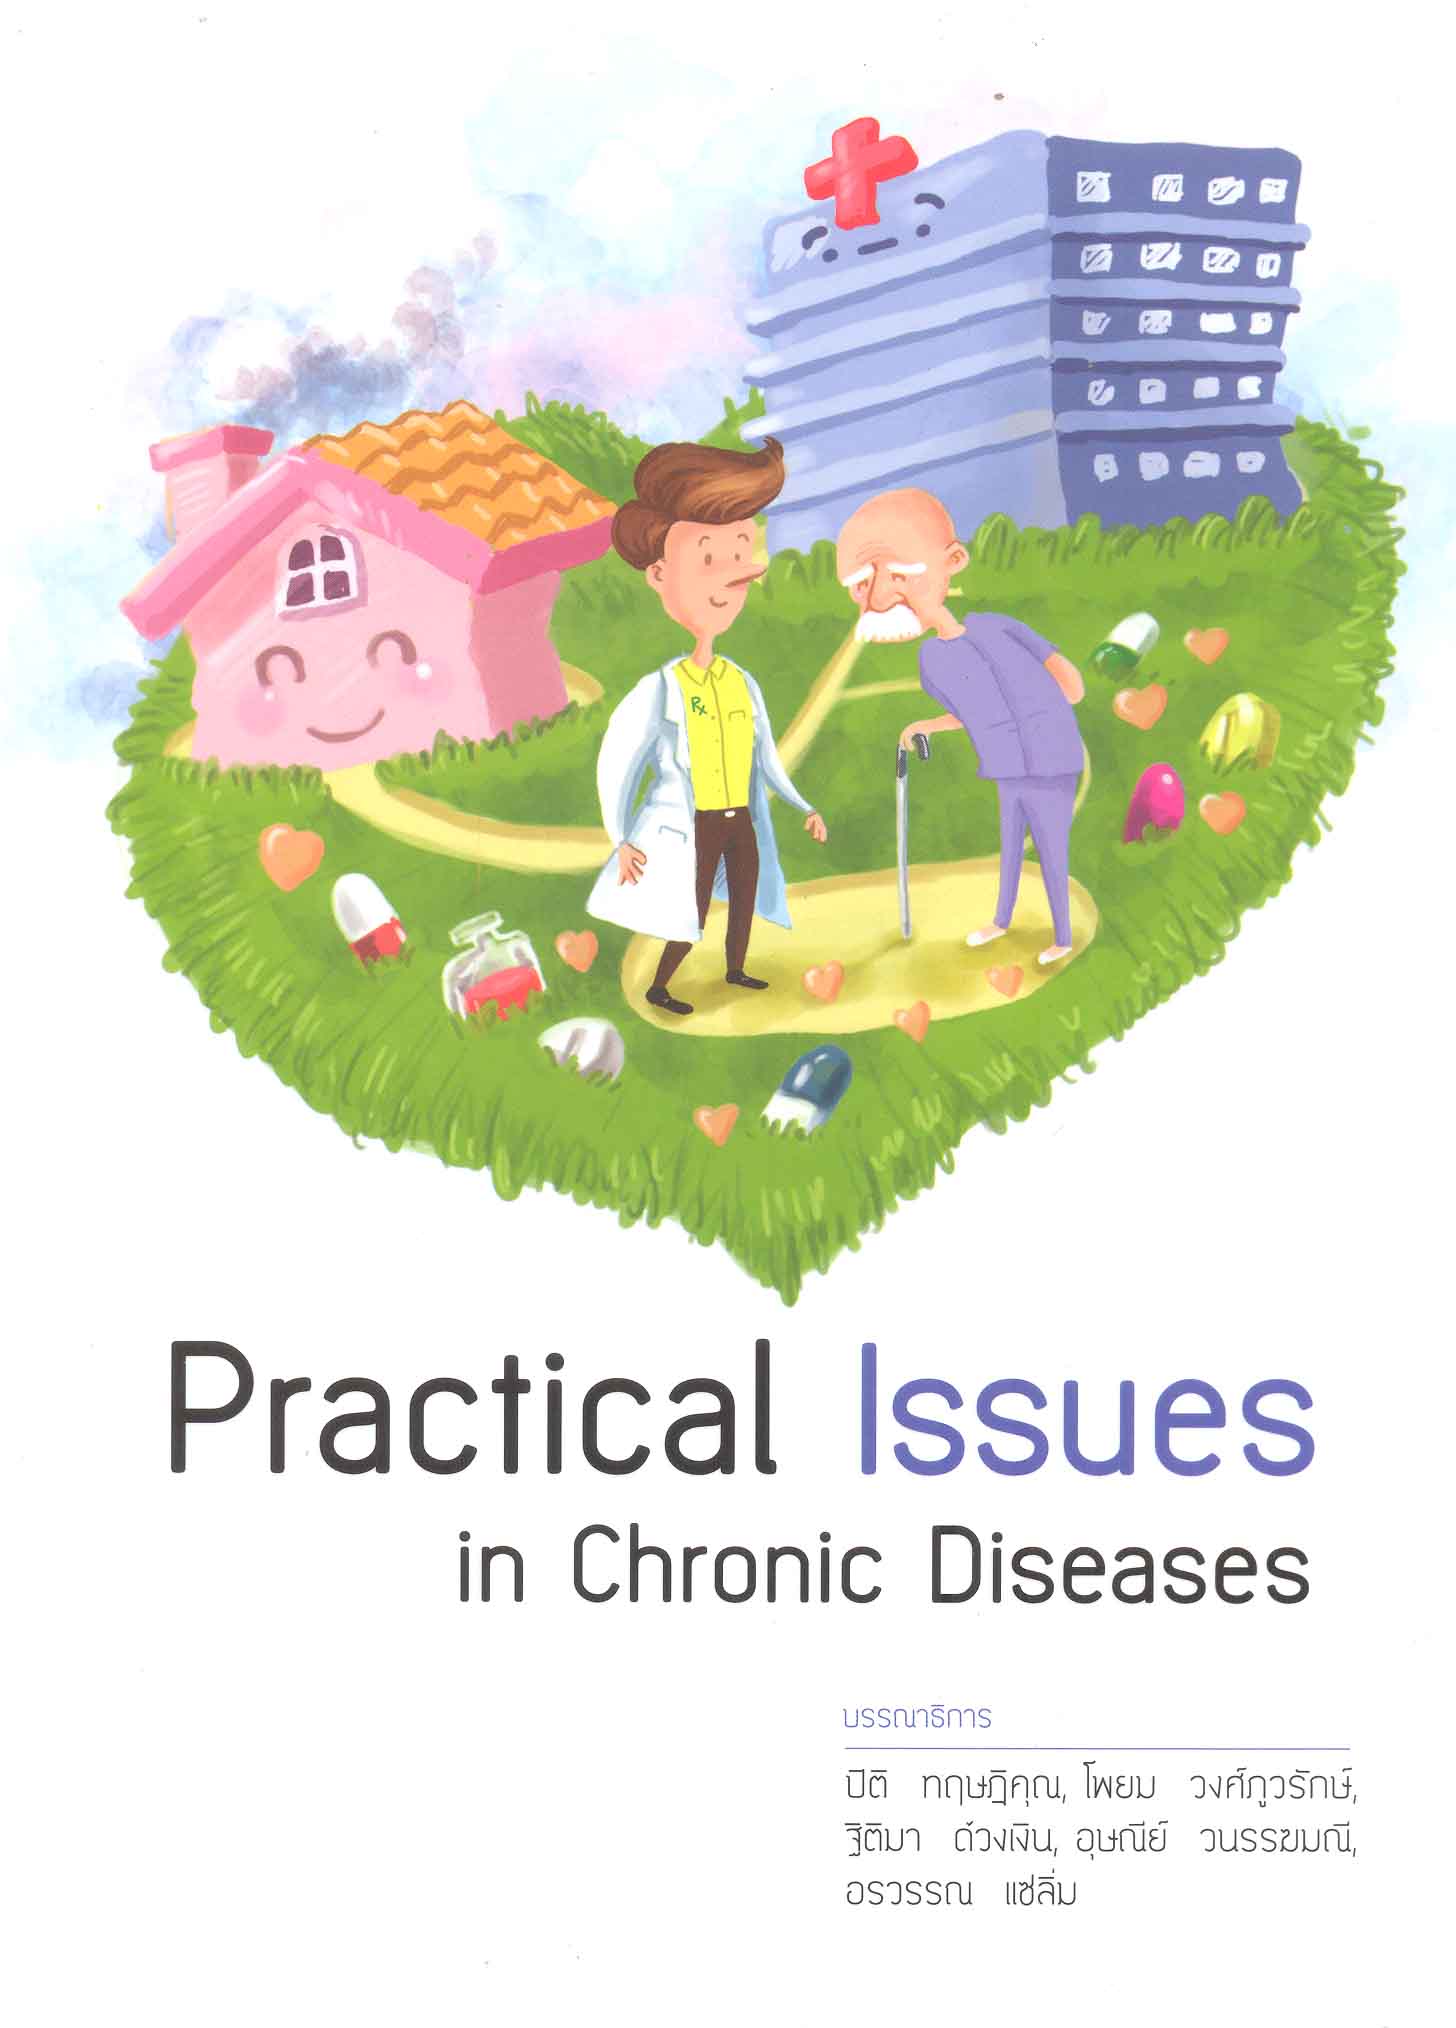 Practical issues in chronic diseases